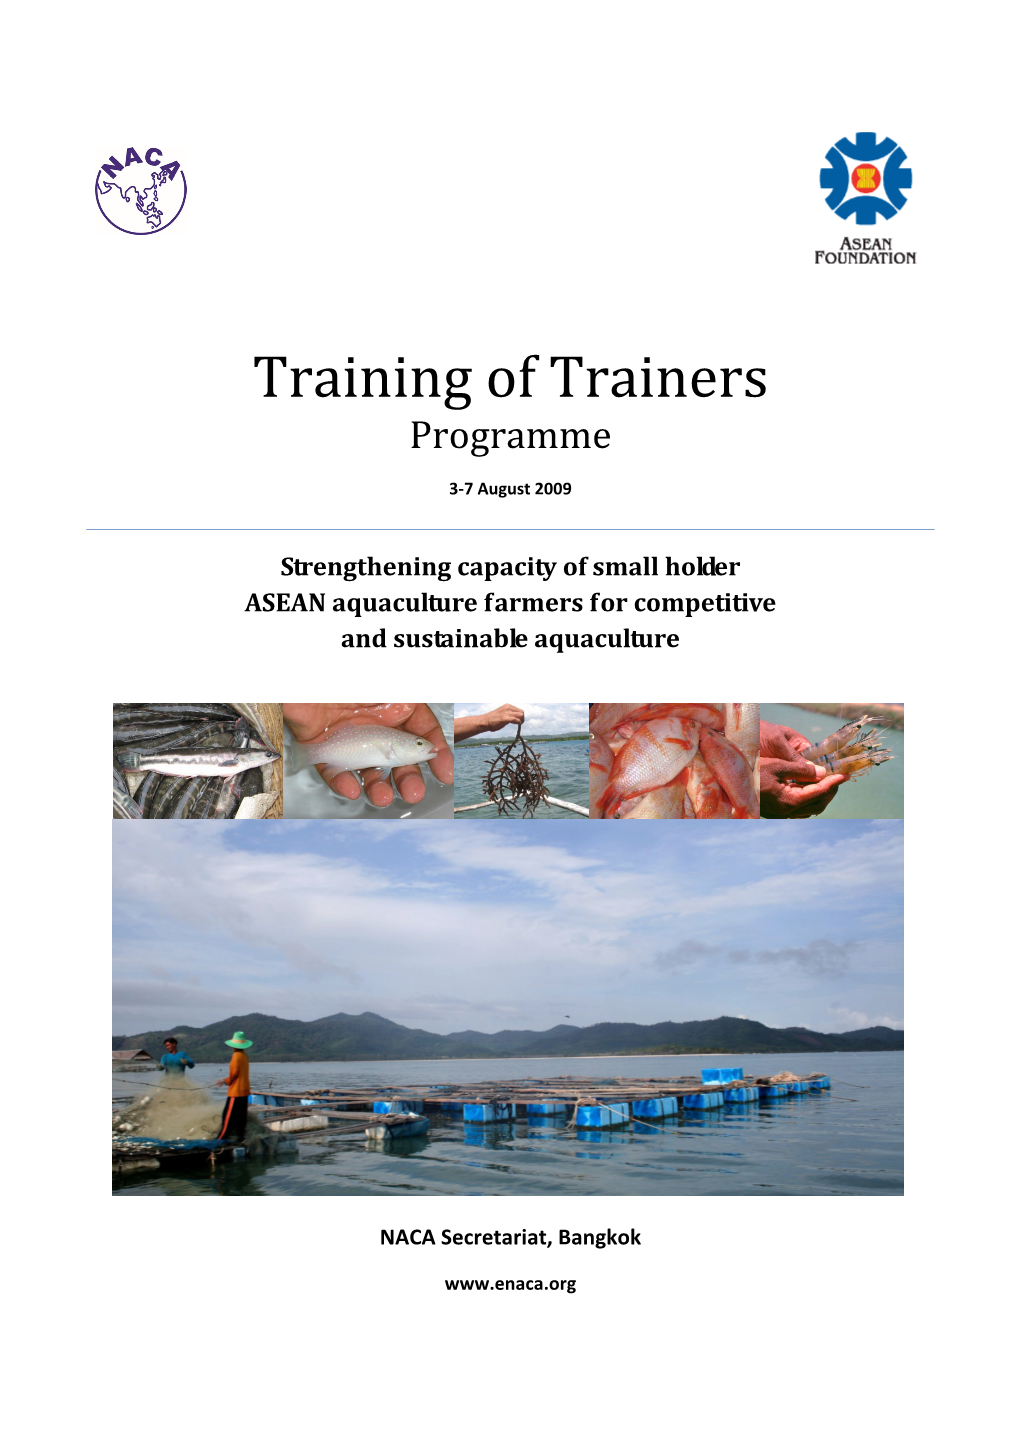 Strengthening Capacity of Small Holder ASEAN Aquaculture Farmers for Competitive and Sustainable Aquaculture